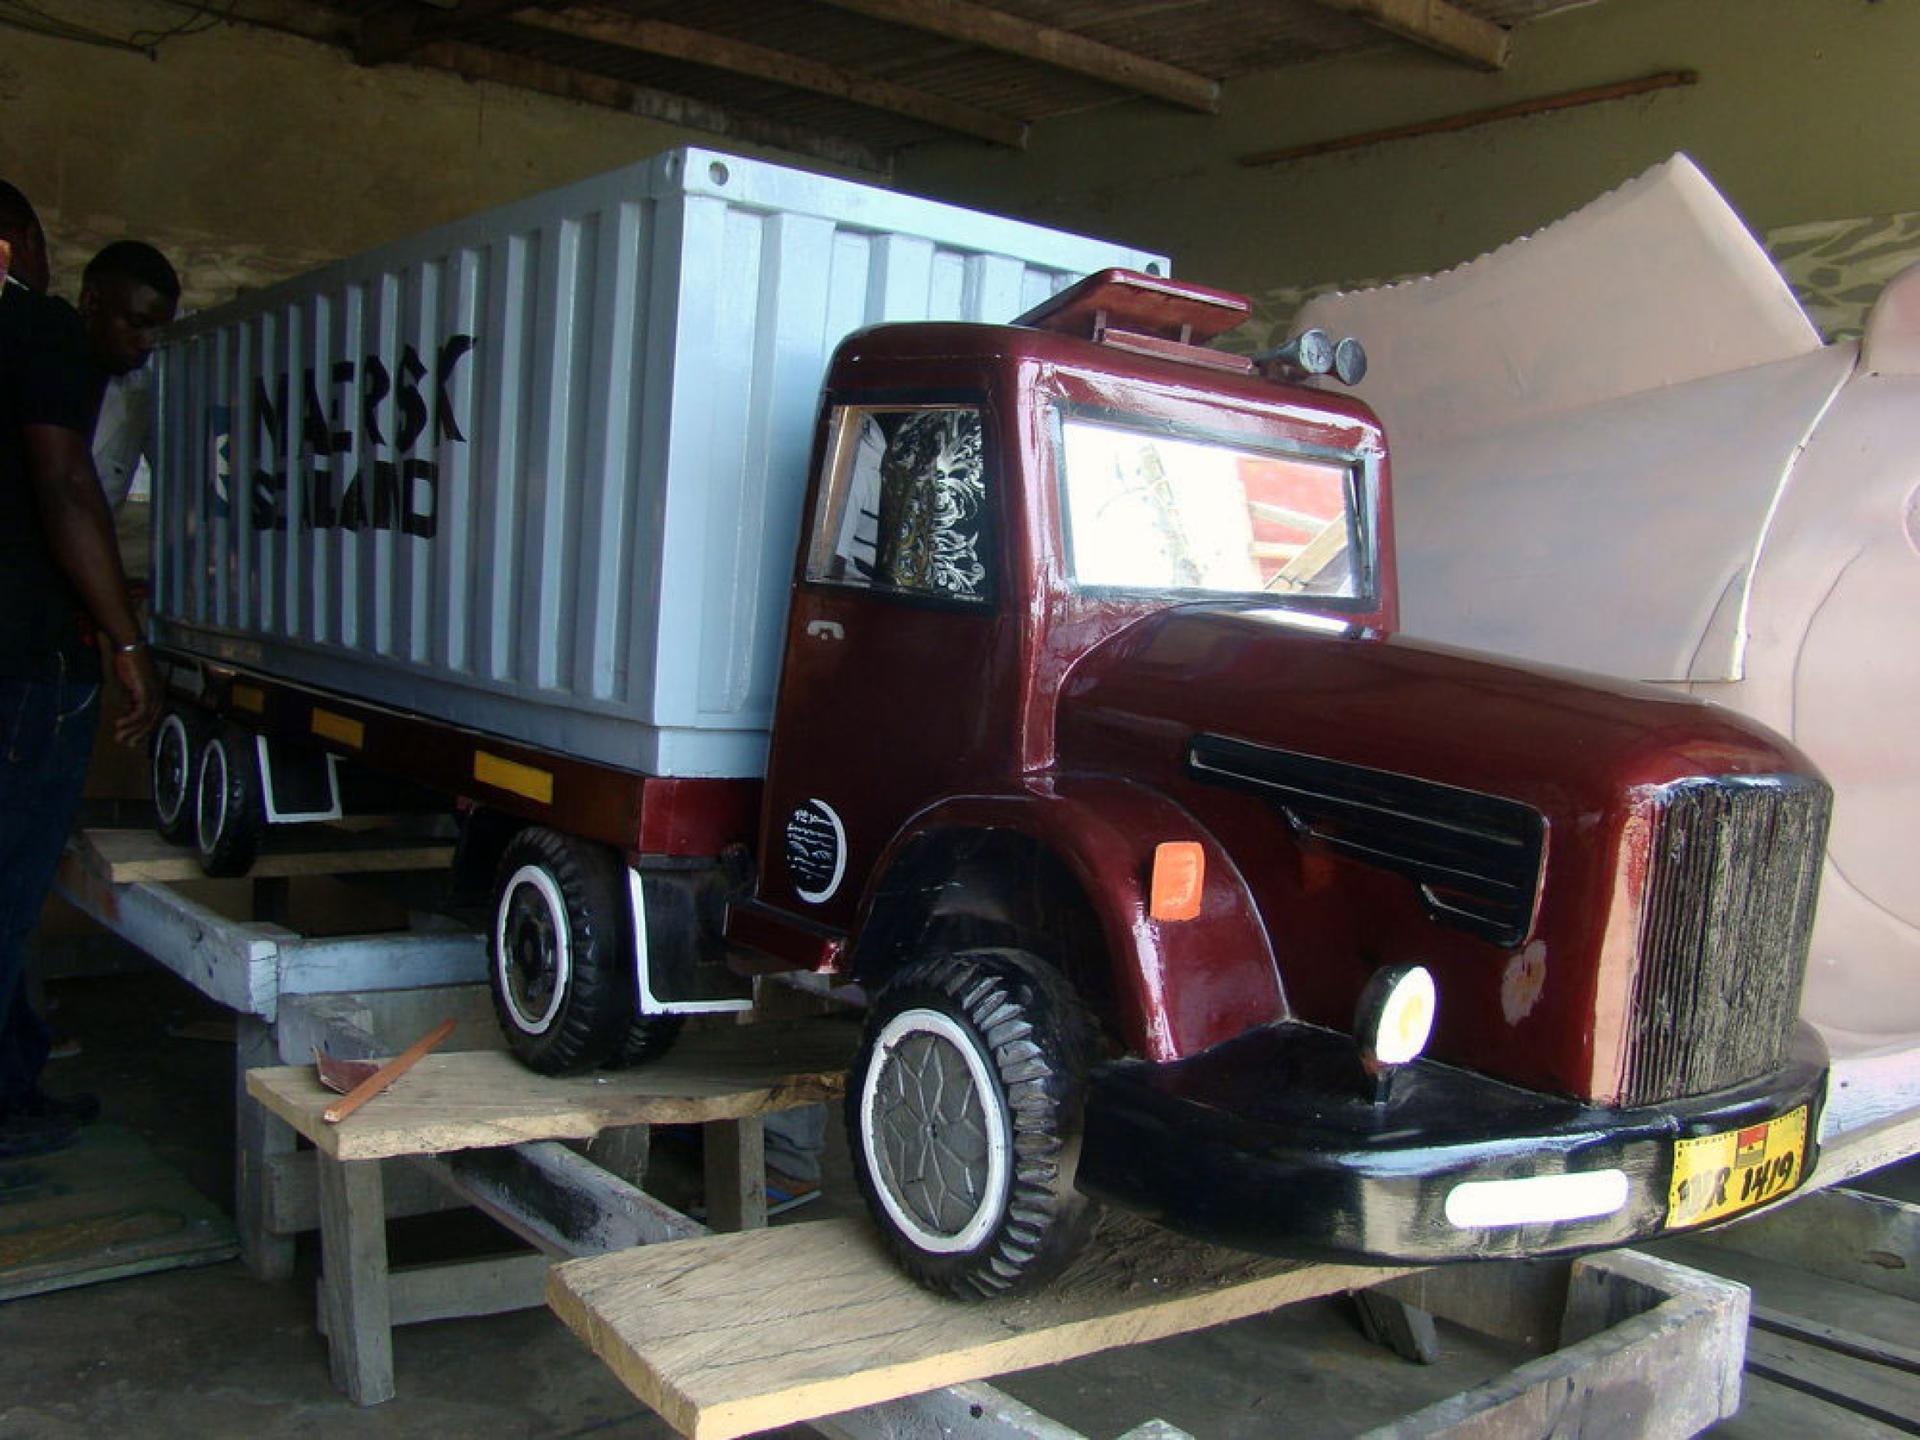 A truck-shaped coffin is made for a trucker who has died. 